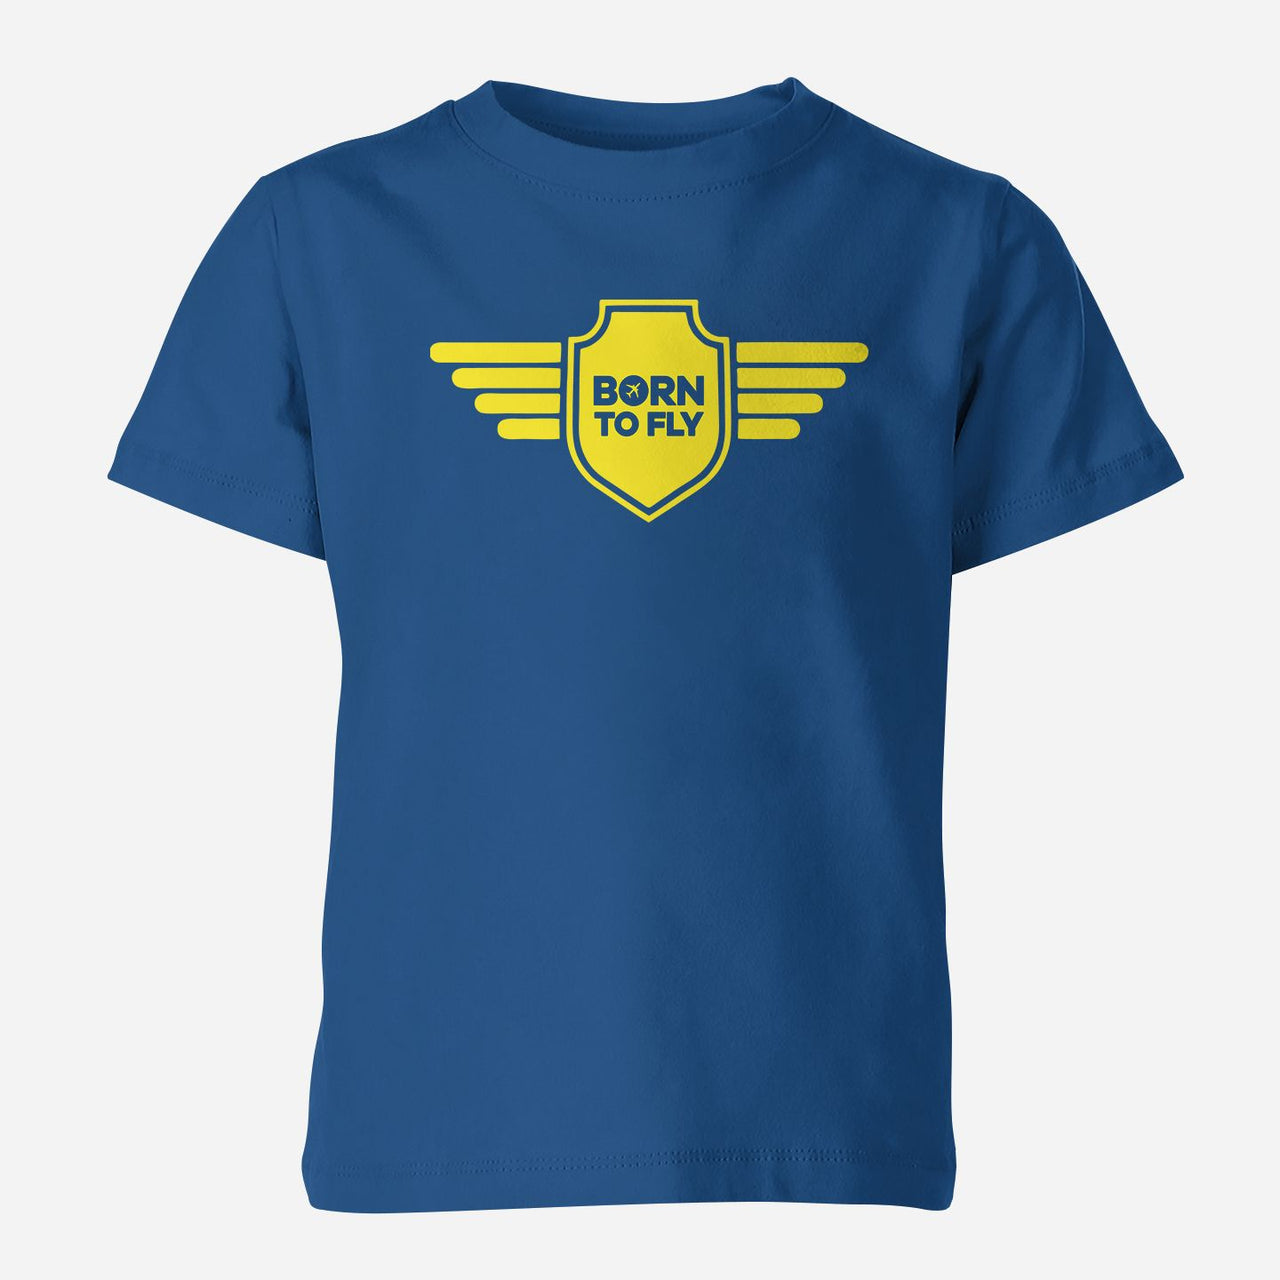 Born To Fly & Badge Designed Children T-Shirts